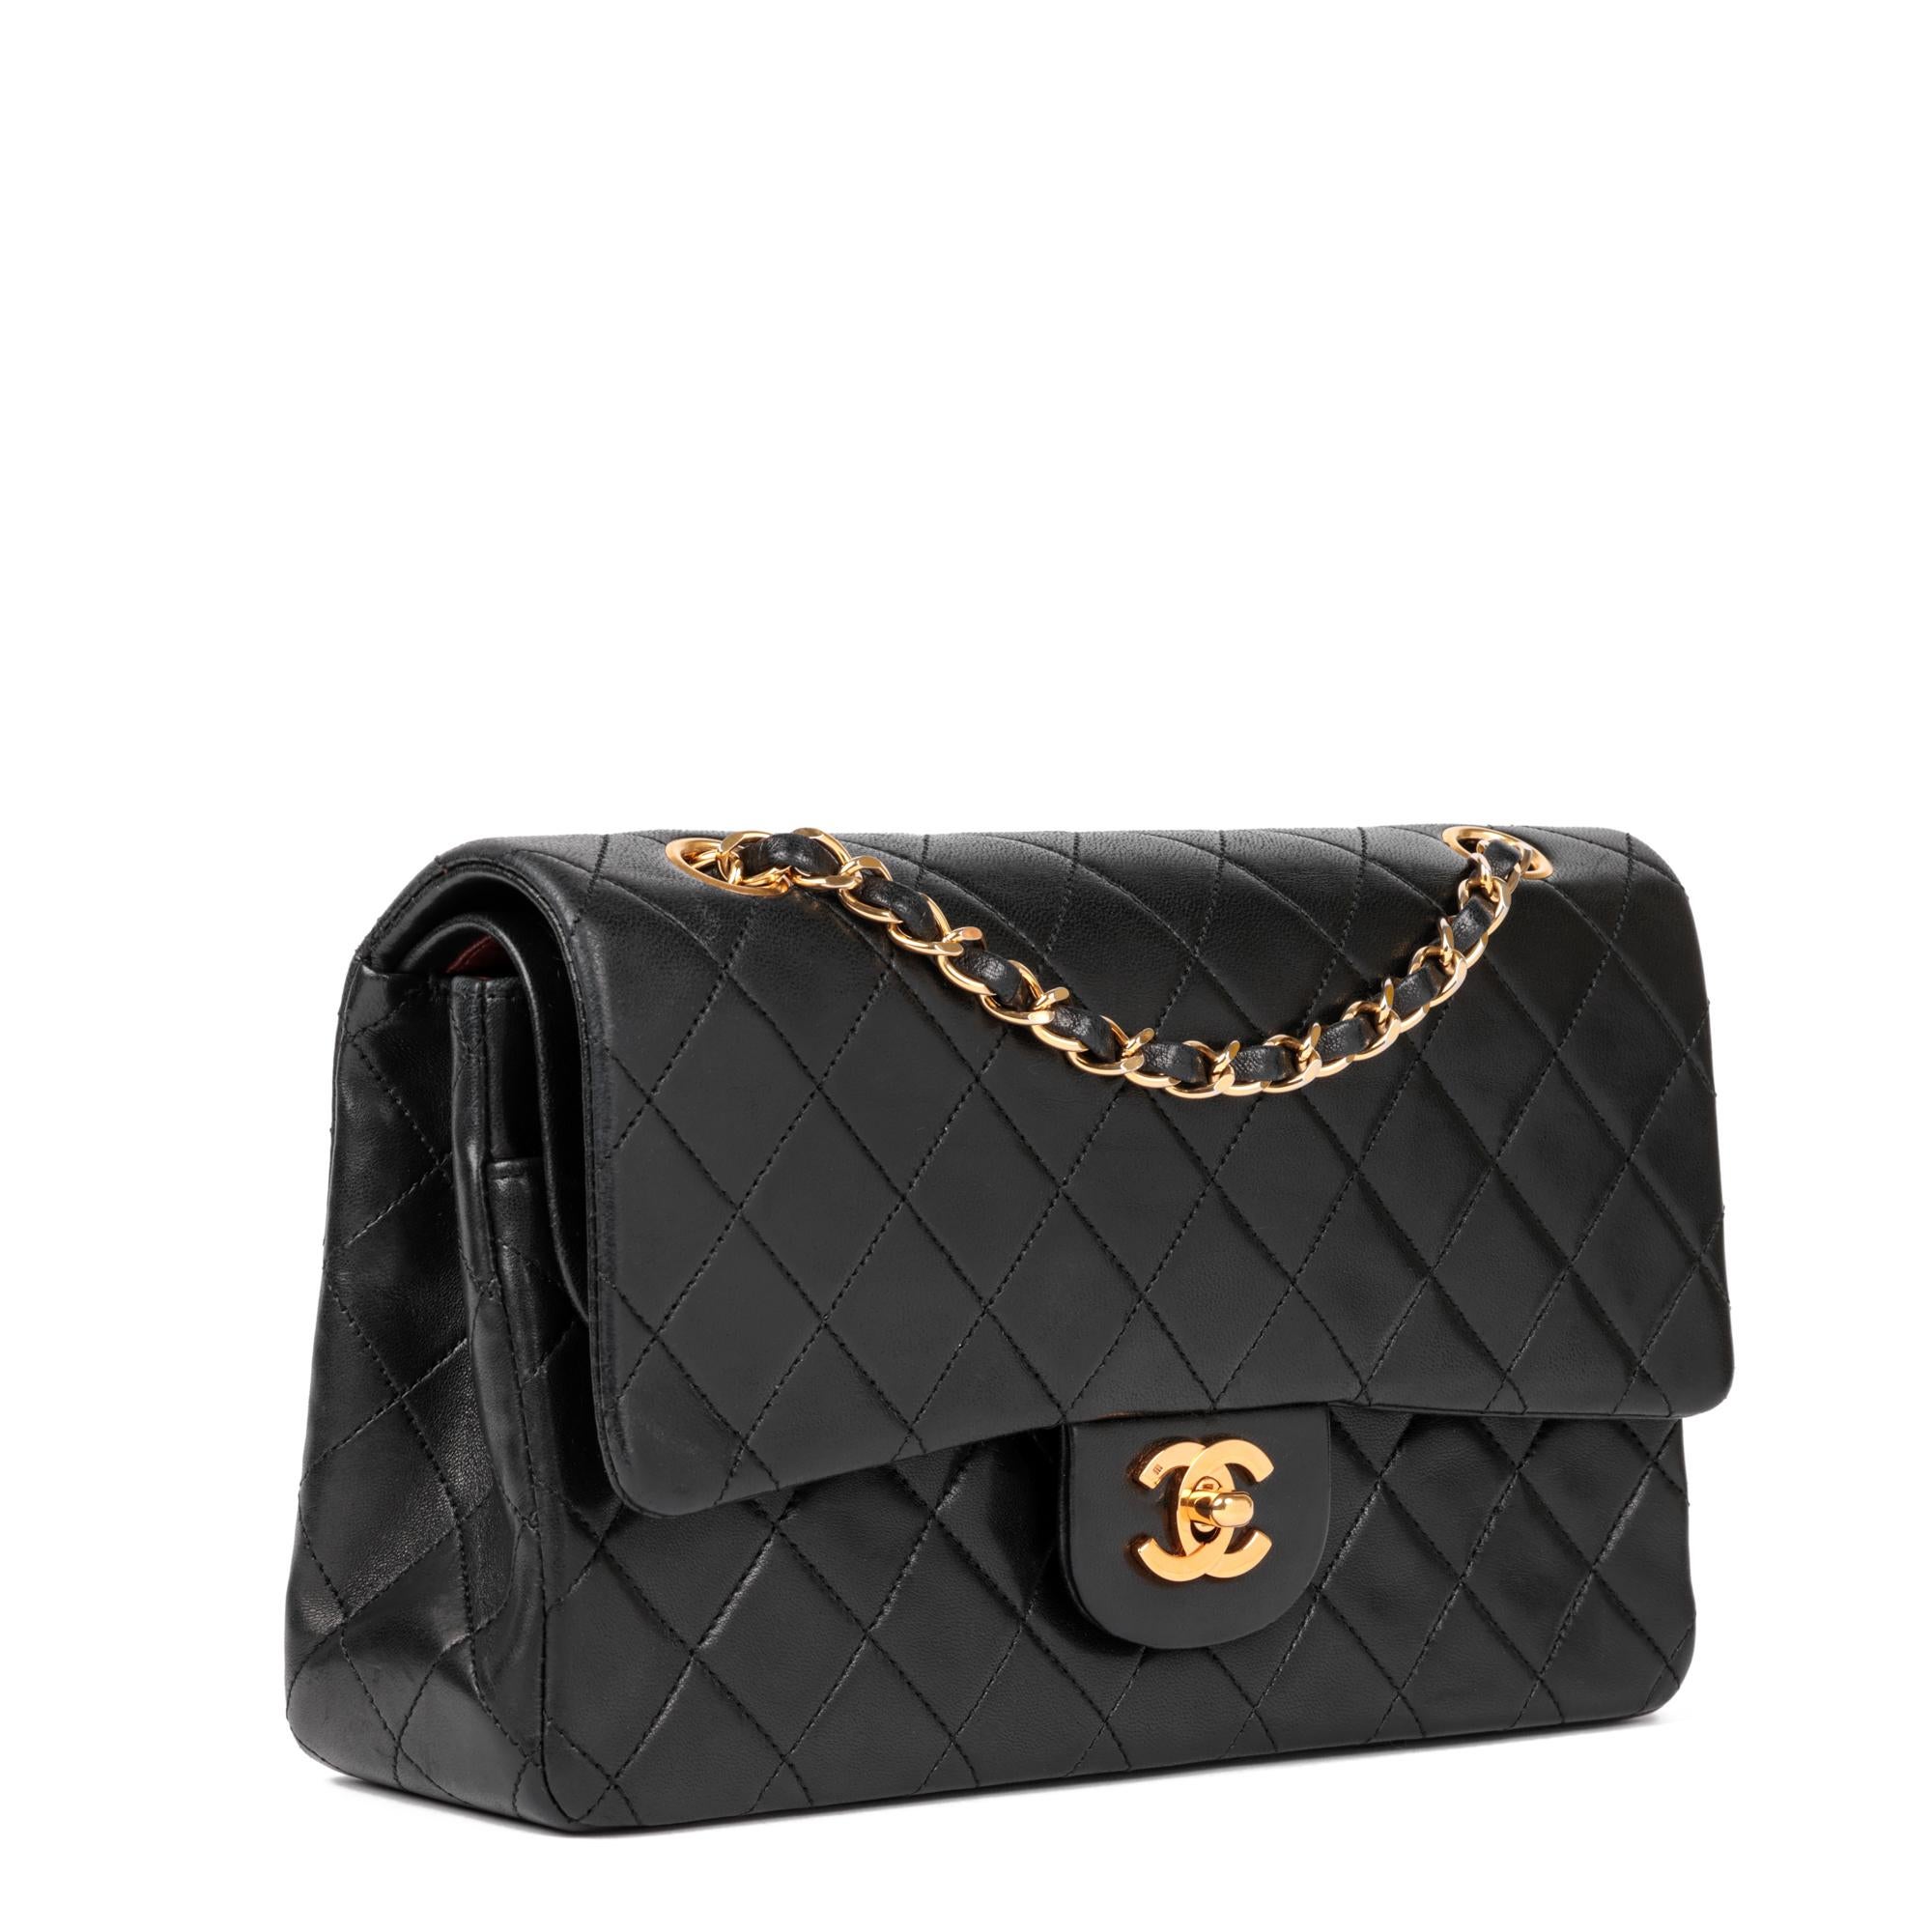 CHANEL
Black Quilted Lambskin Vintage Medium Classic Double Flap Bag

Xupes Reference: CB890
Serial Number: 1447607
Age (Circa): 1990
Accompanied By: Chanel Dust Bag 
Authenticity Details: Serial Sticker (Made in France)
Gender: Ladies
Type: